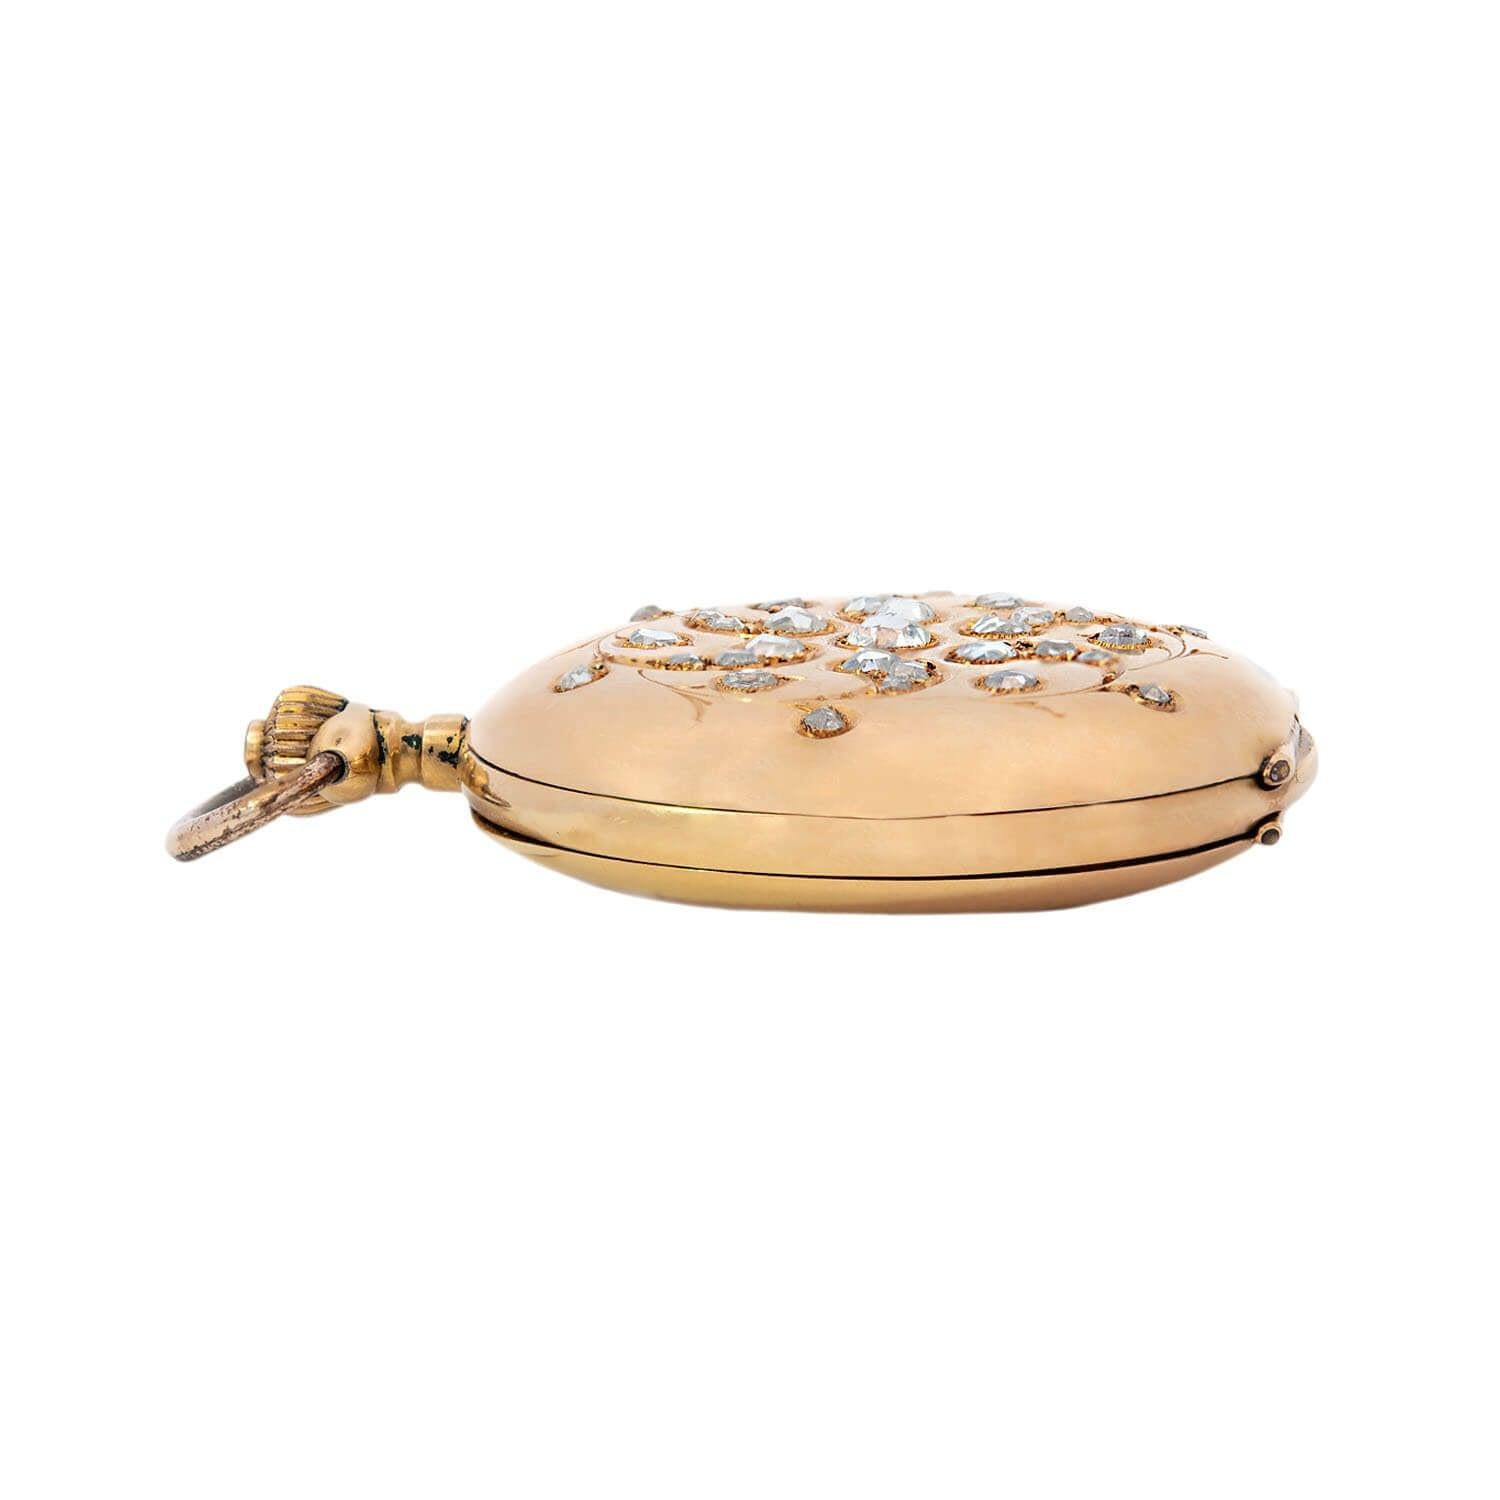 An absolutely exquisite diamond pocket watch from the Art Nouveau (1910) era! Swiss in origin, this beautiful piece is encapsulated in a hunter case that is crafted in 18kt gold and studded with 31 sparkling bead set Rose Cut diamonds with a total